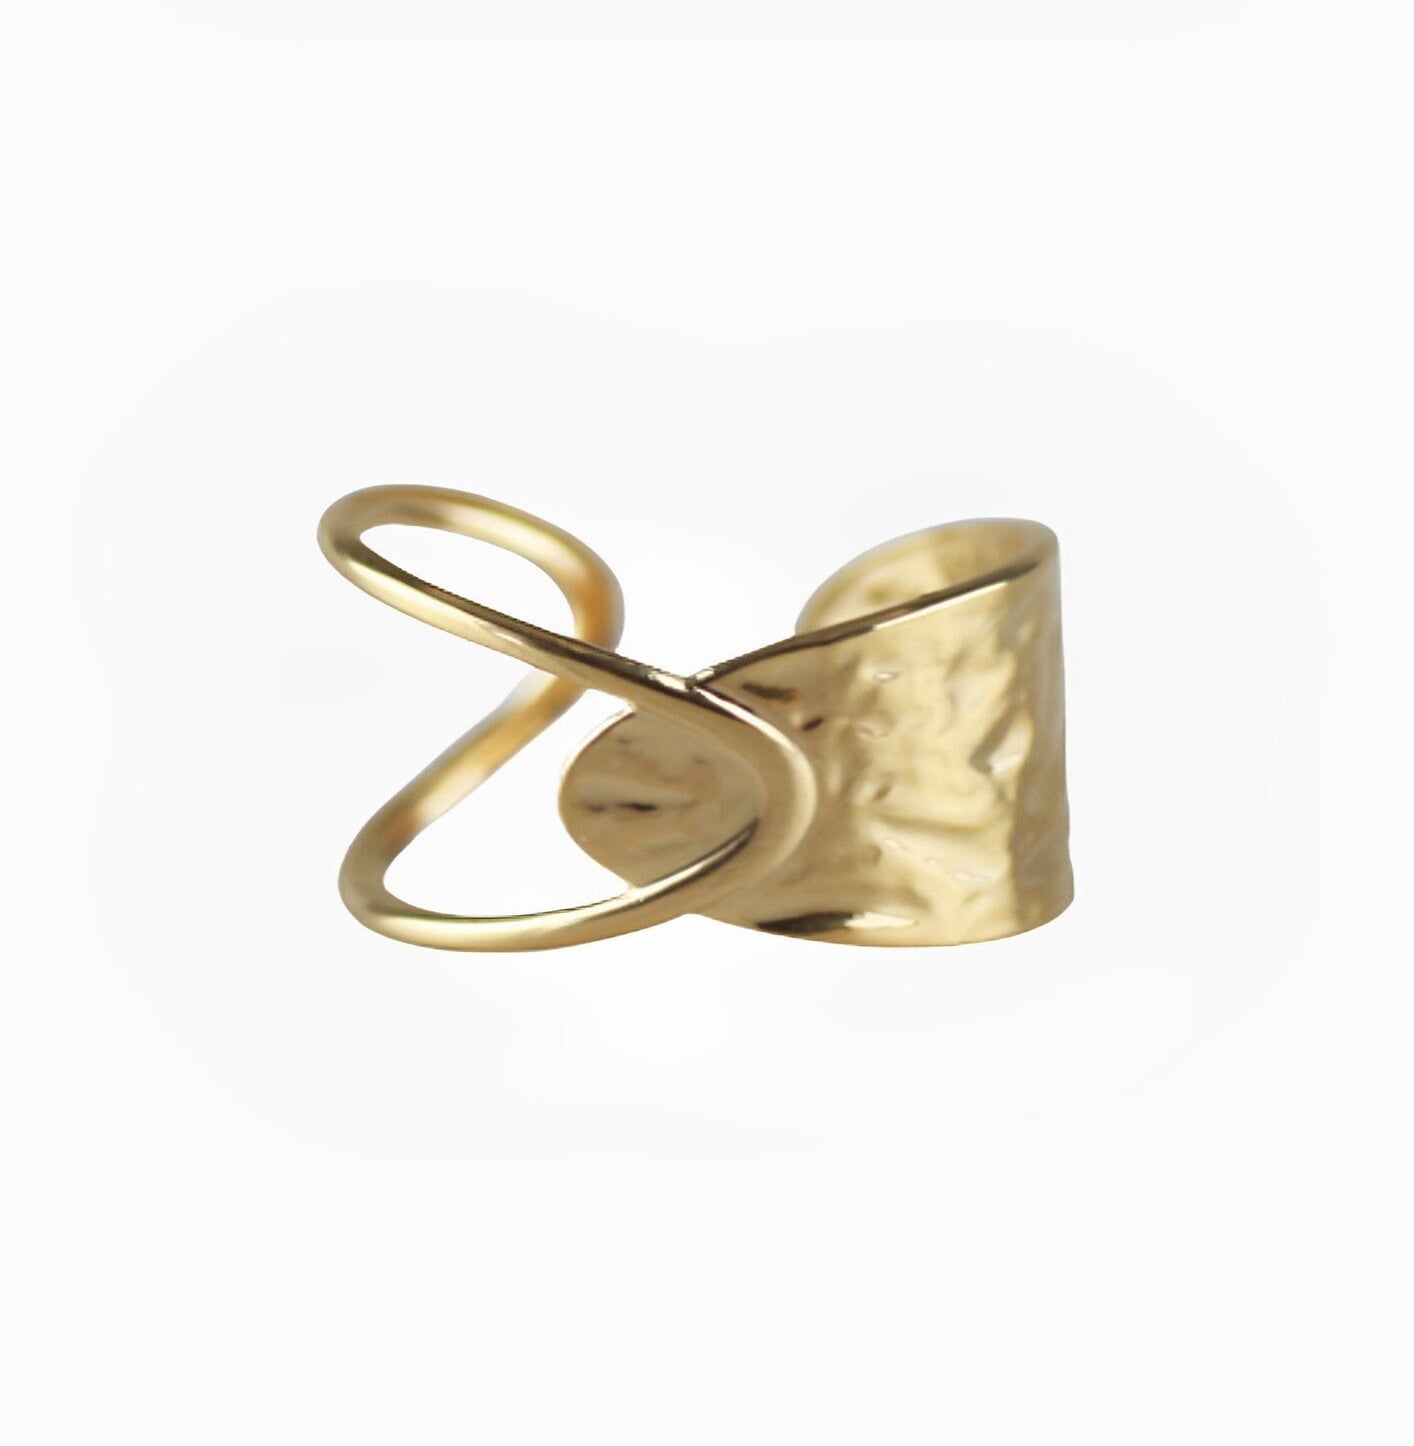 GLORIA RING ring Yubama Jewelry Online Store - The Elegant Designs of Gold and Silver ! 